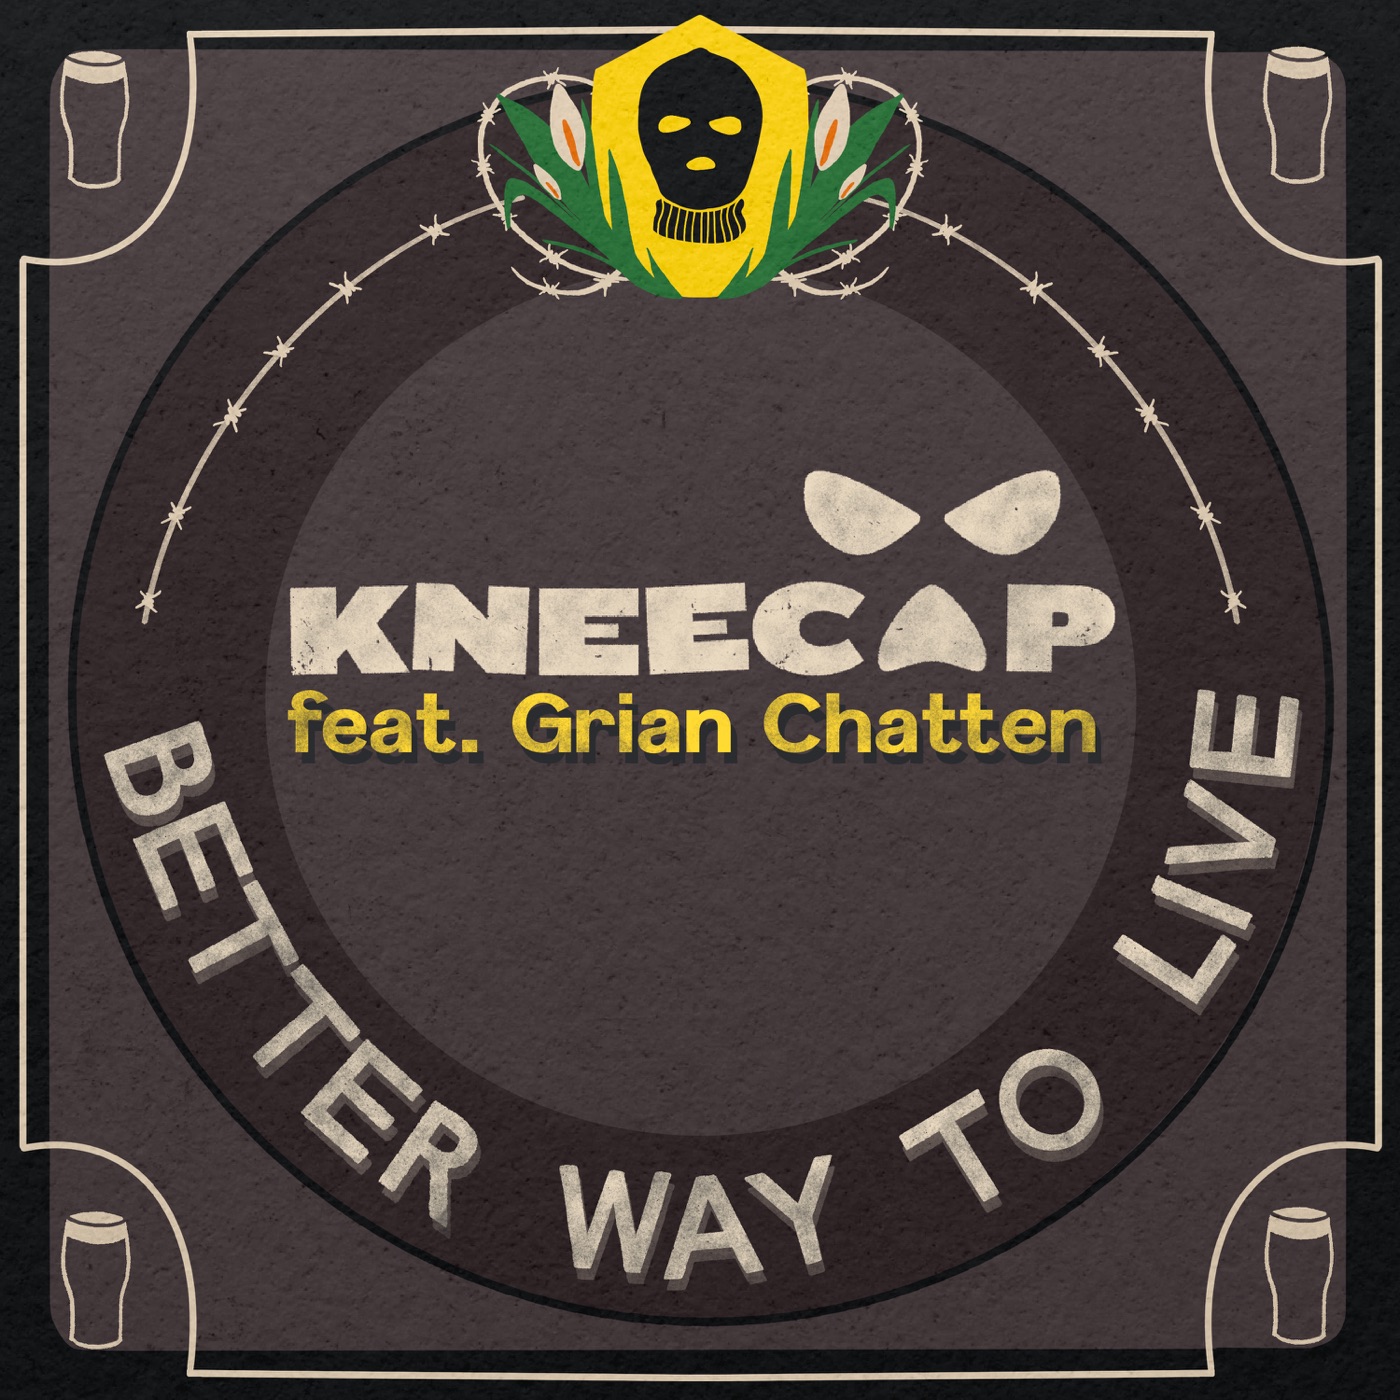 Better Way To Live by KNEECAP, Grian Chatten